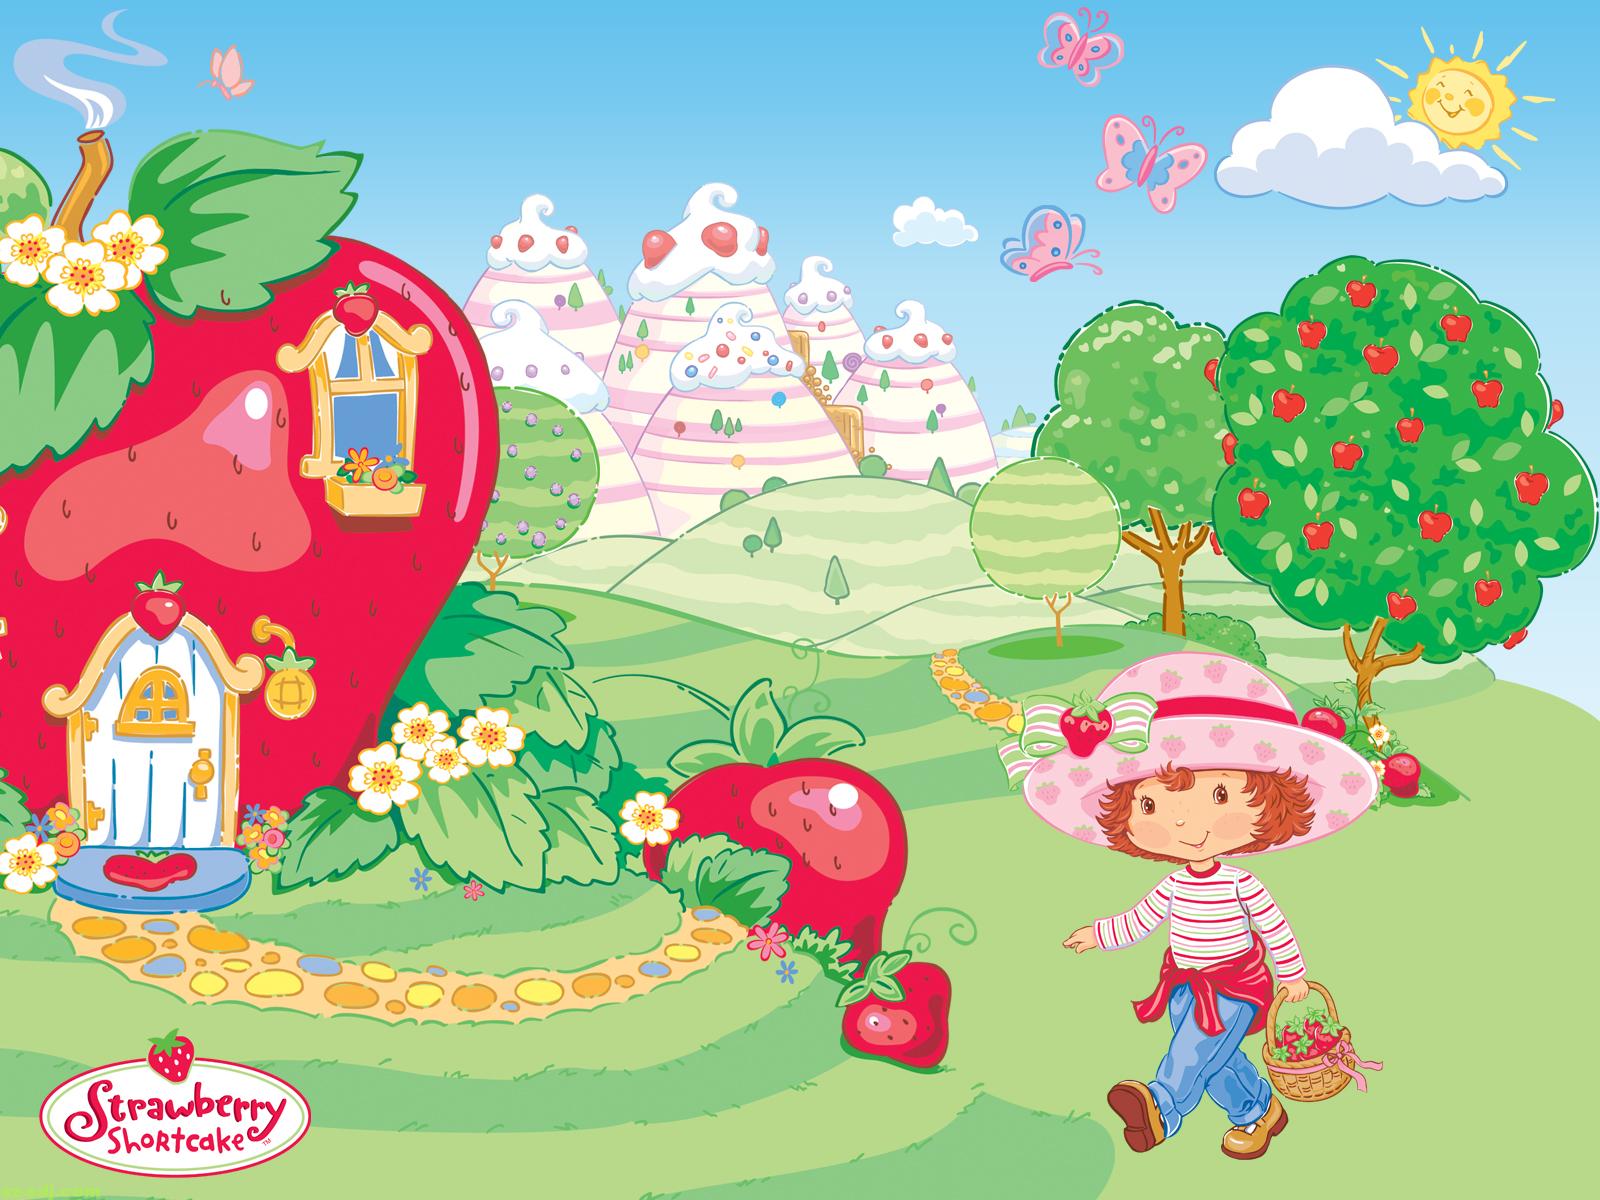 Strawberry Shortcake Wallpapers - Wallpaper Cave